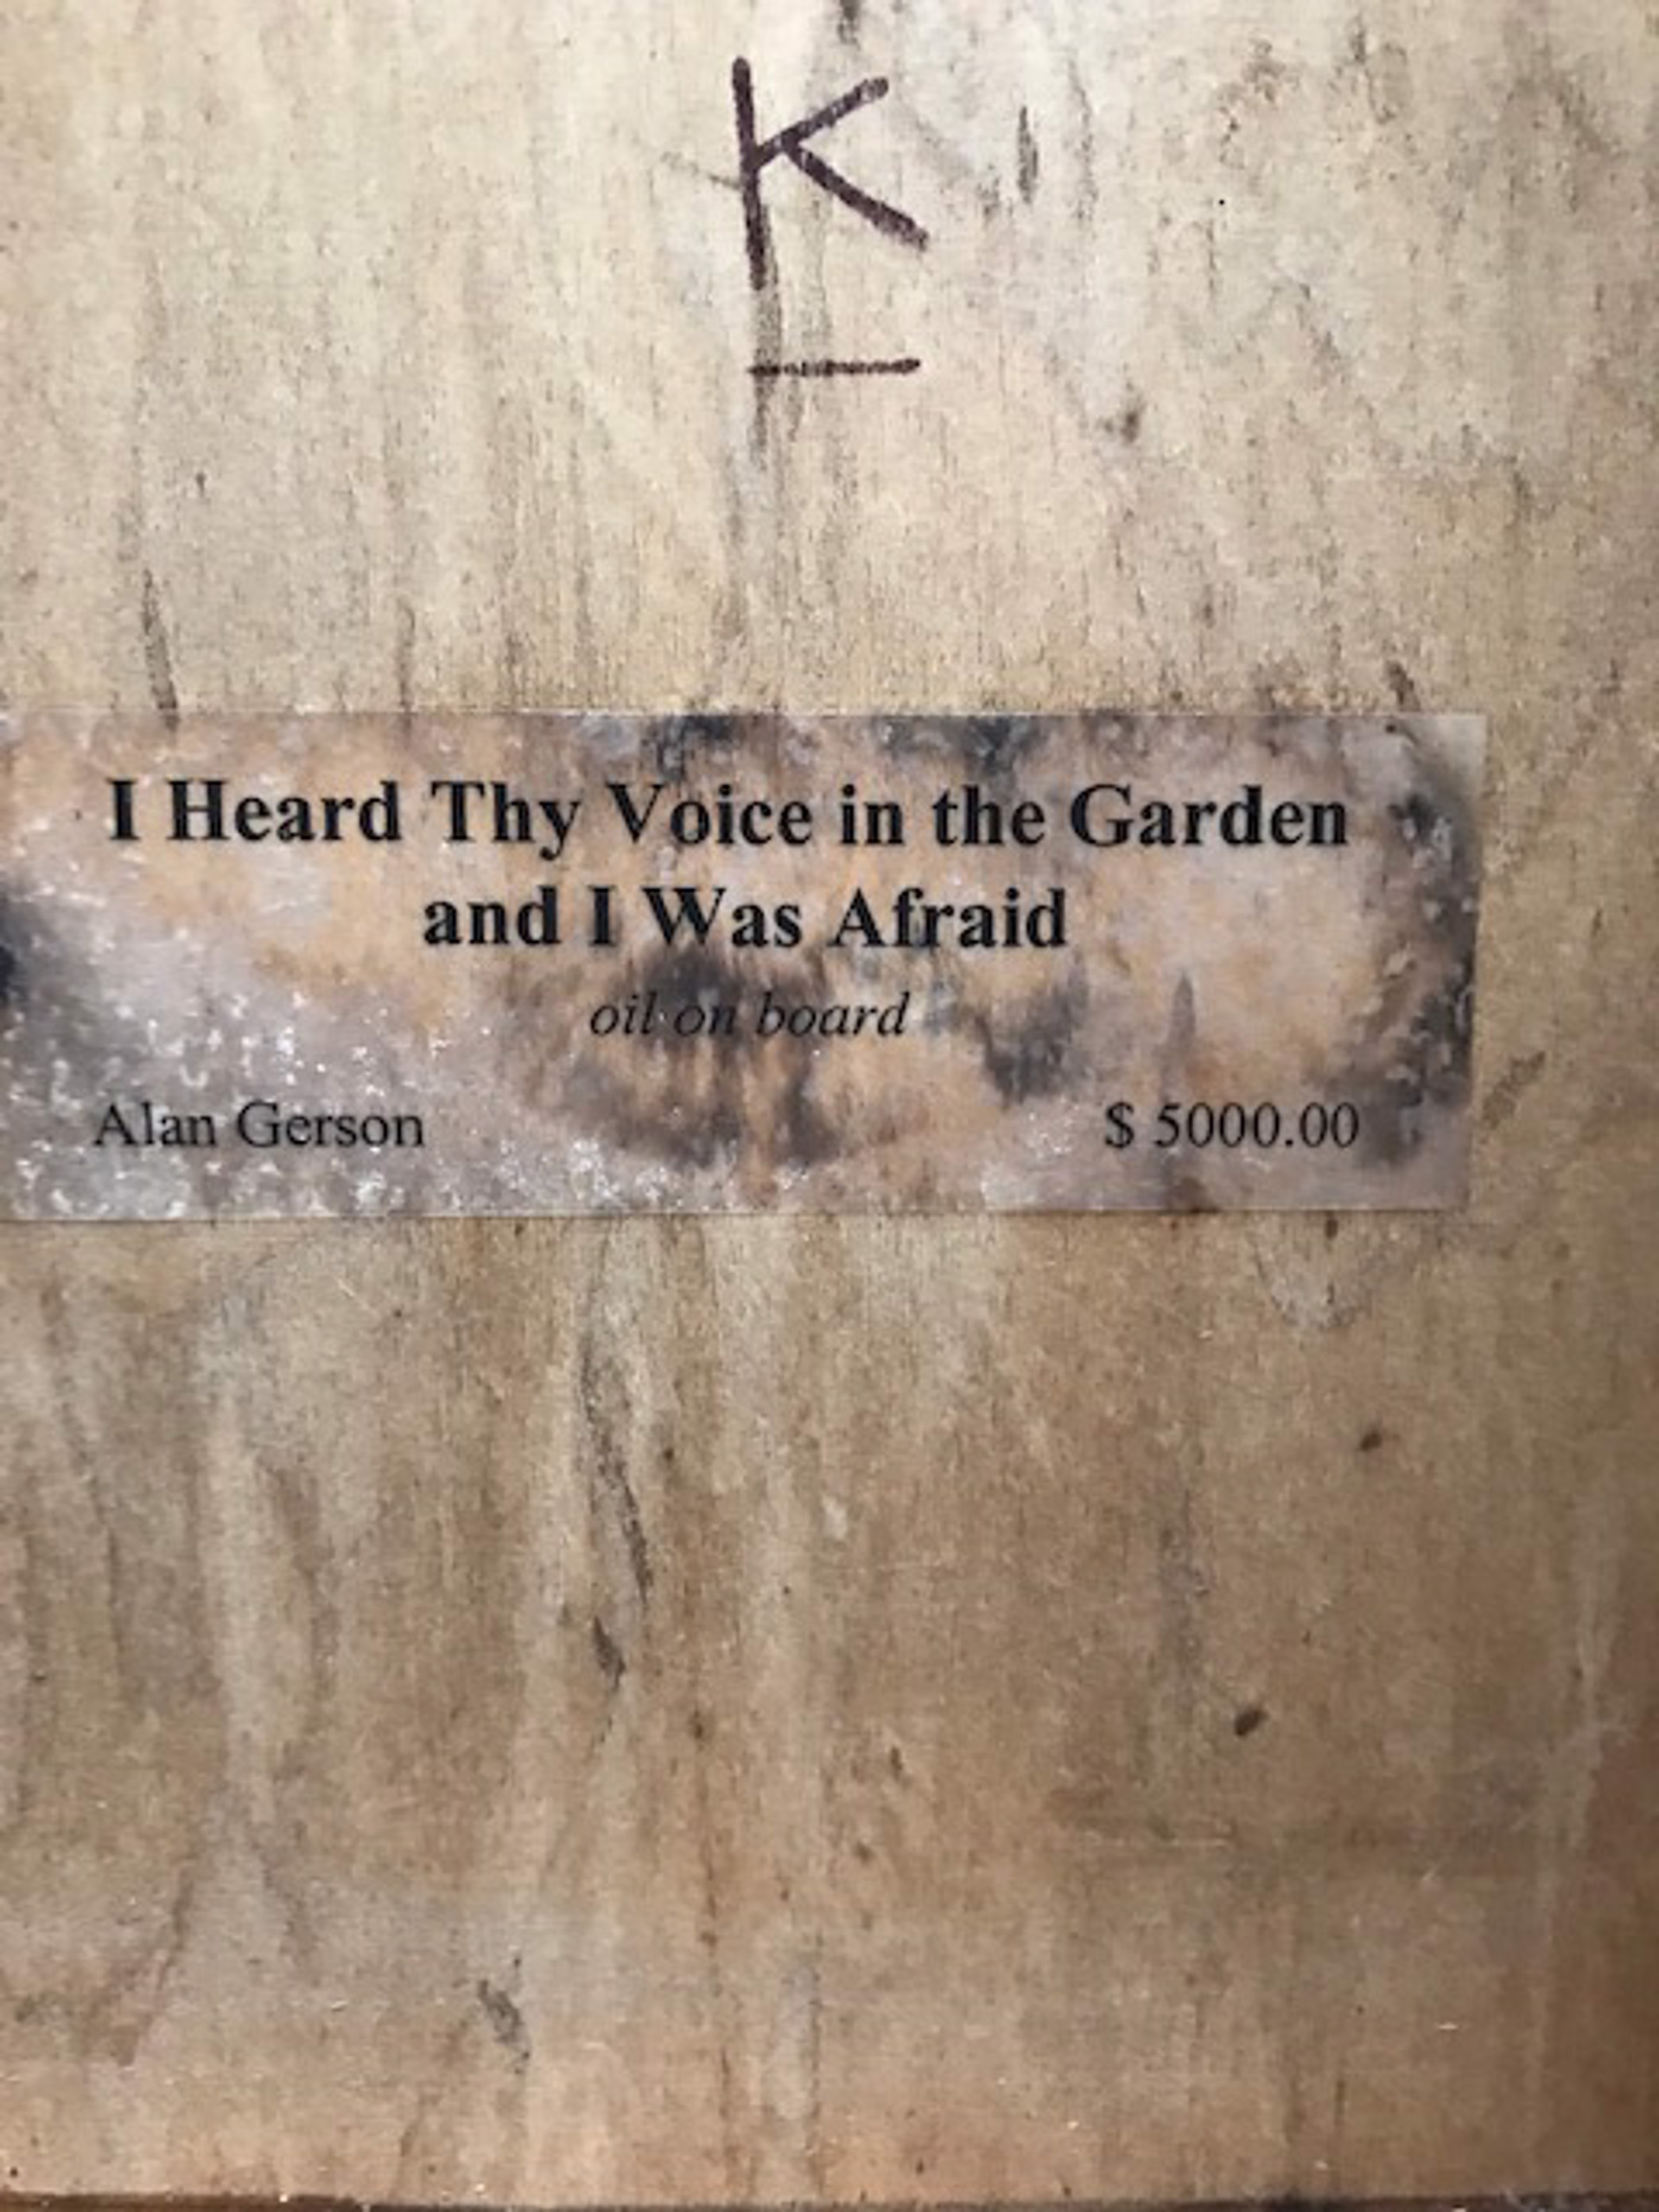 I Heard Thy Voice in the Garden and I Was Afraid  by Alan Gerson